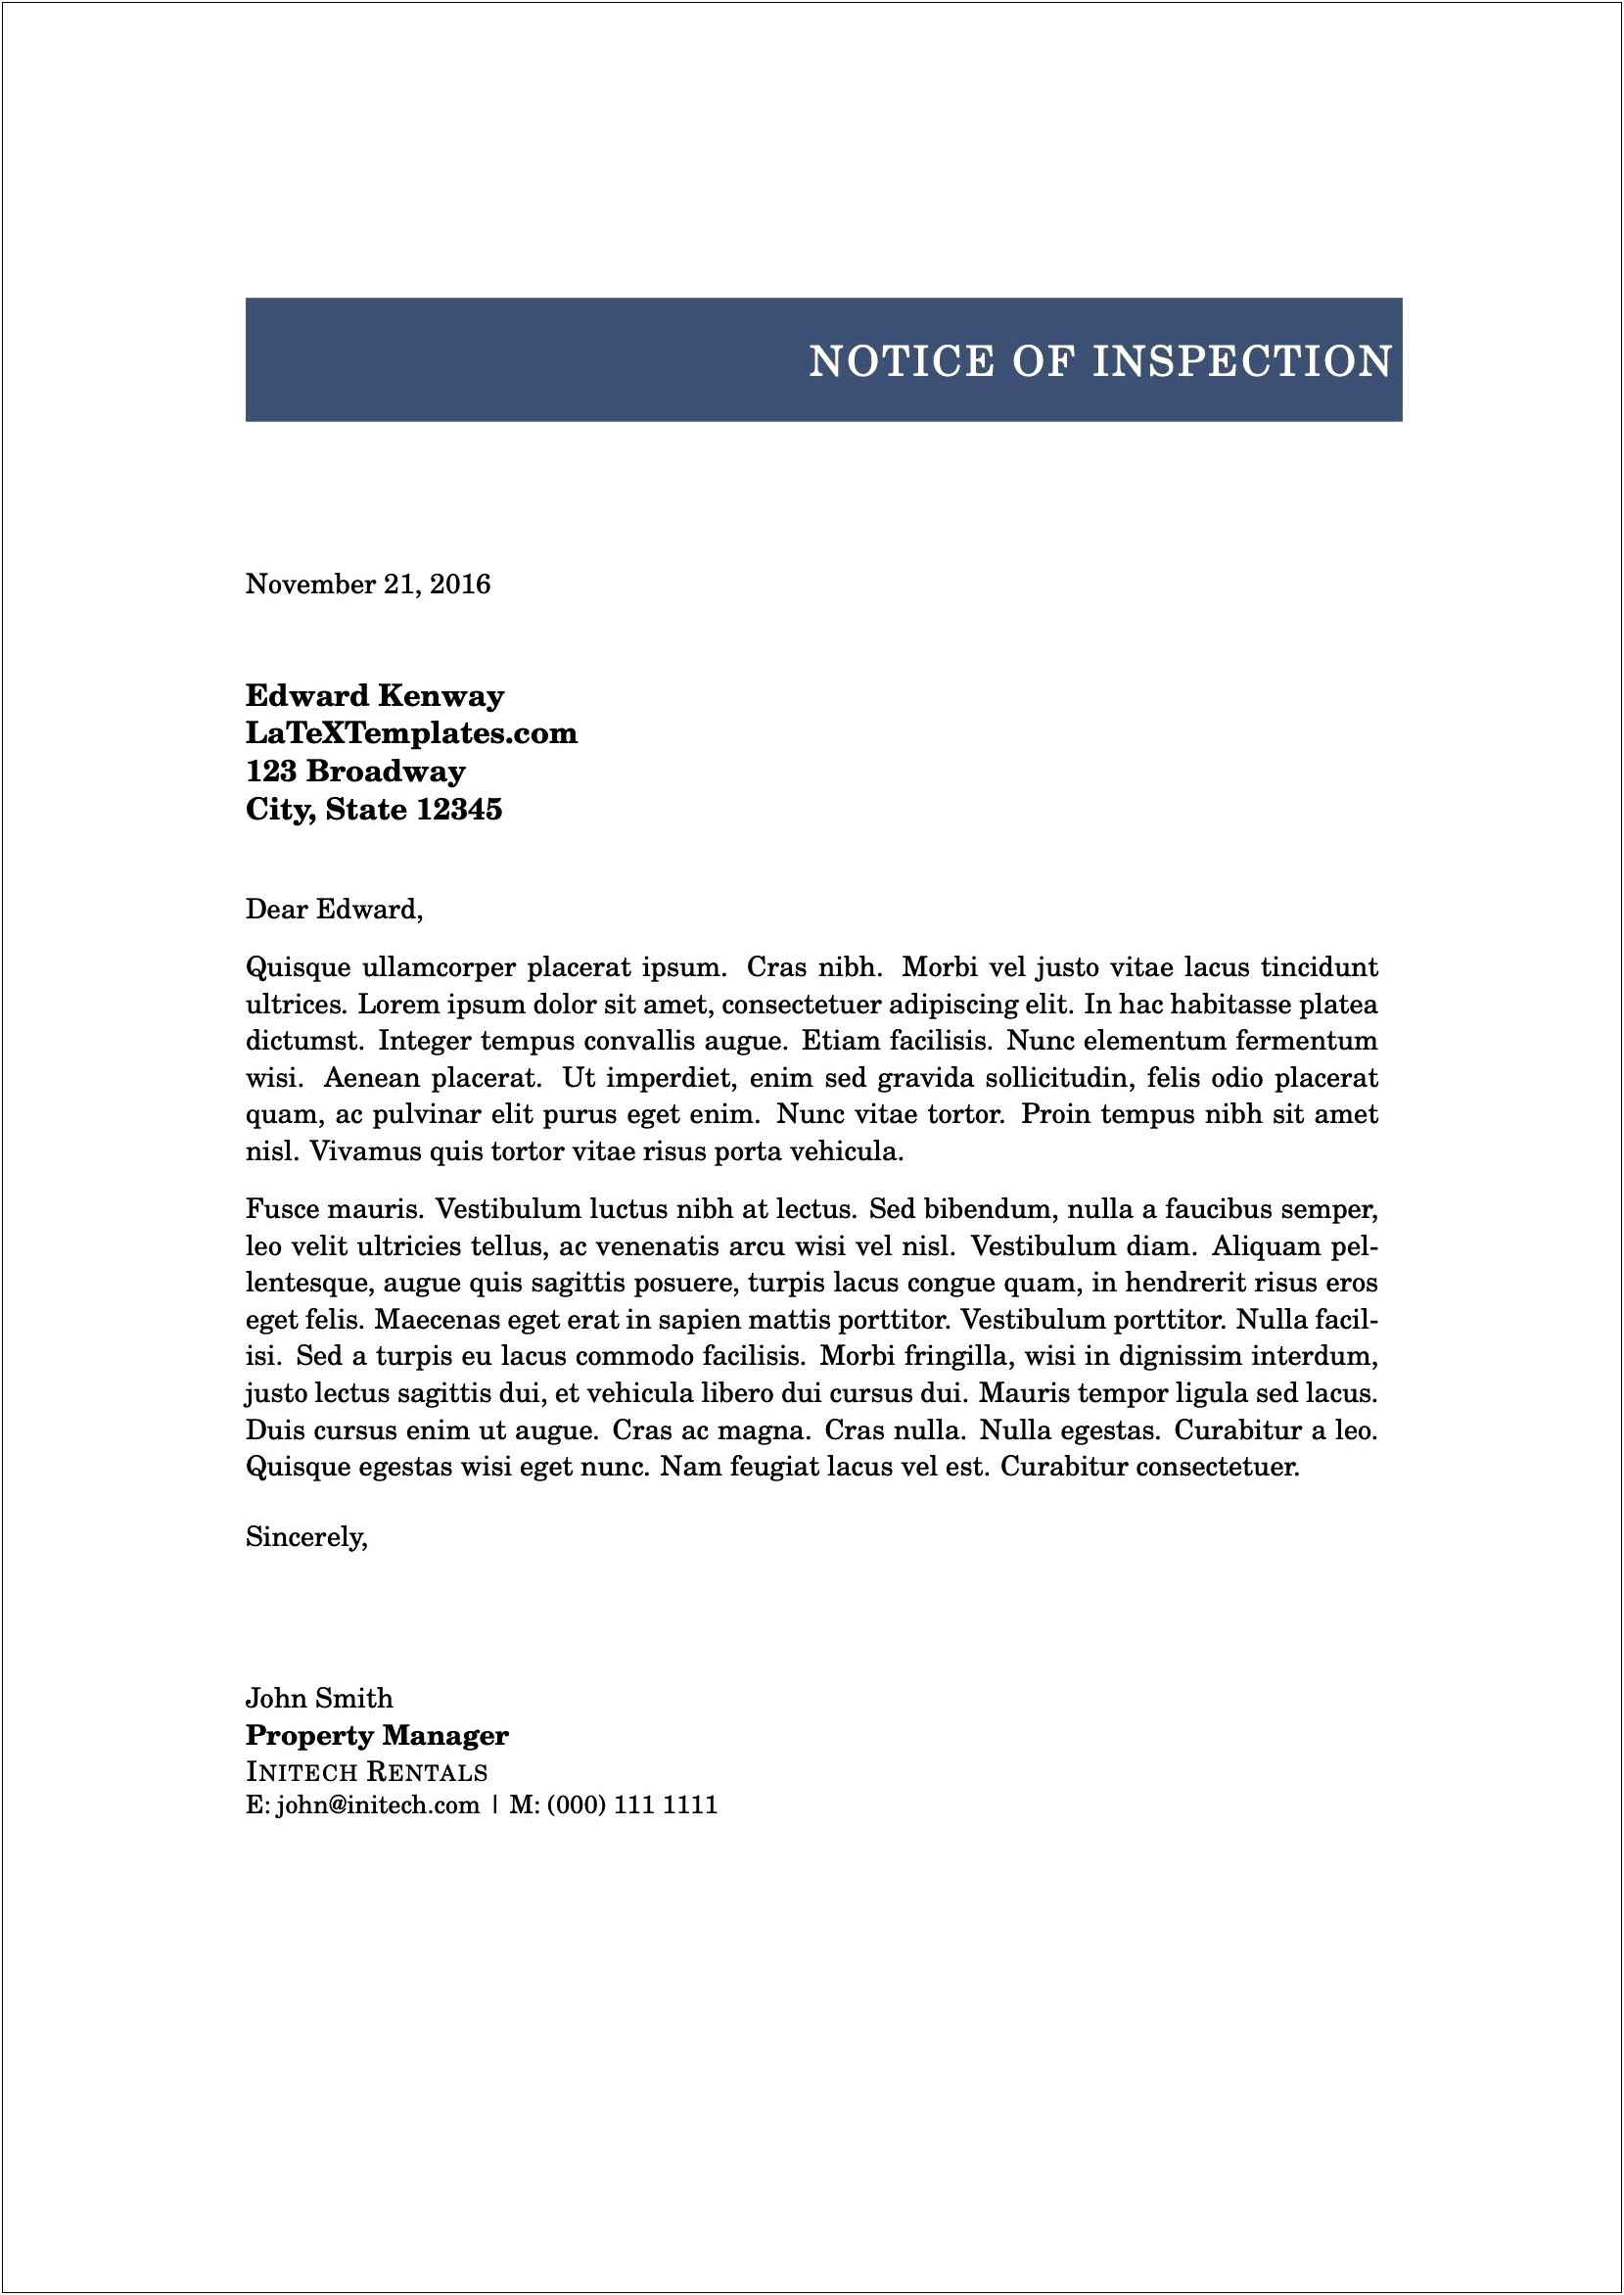 A Formal Letter Following The Business Letter Template